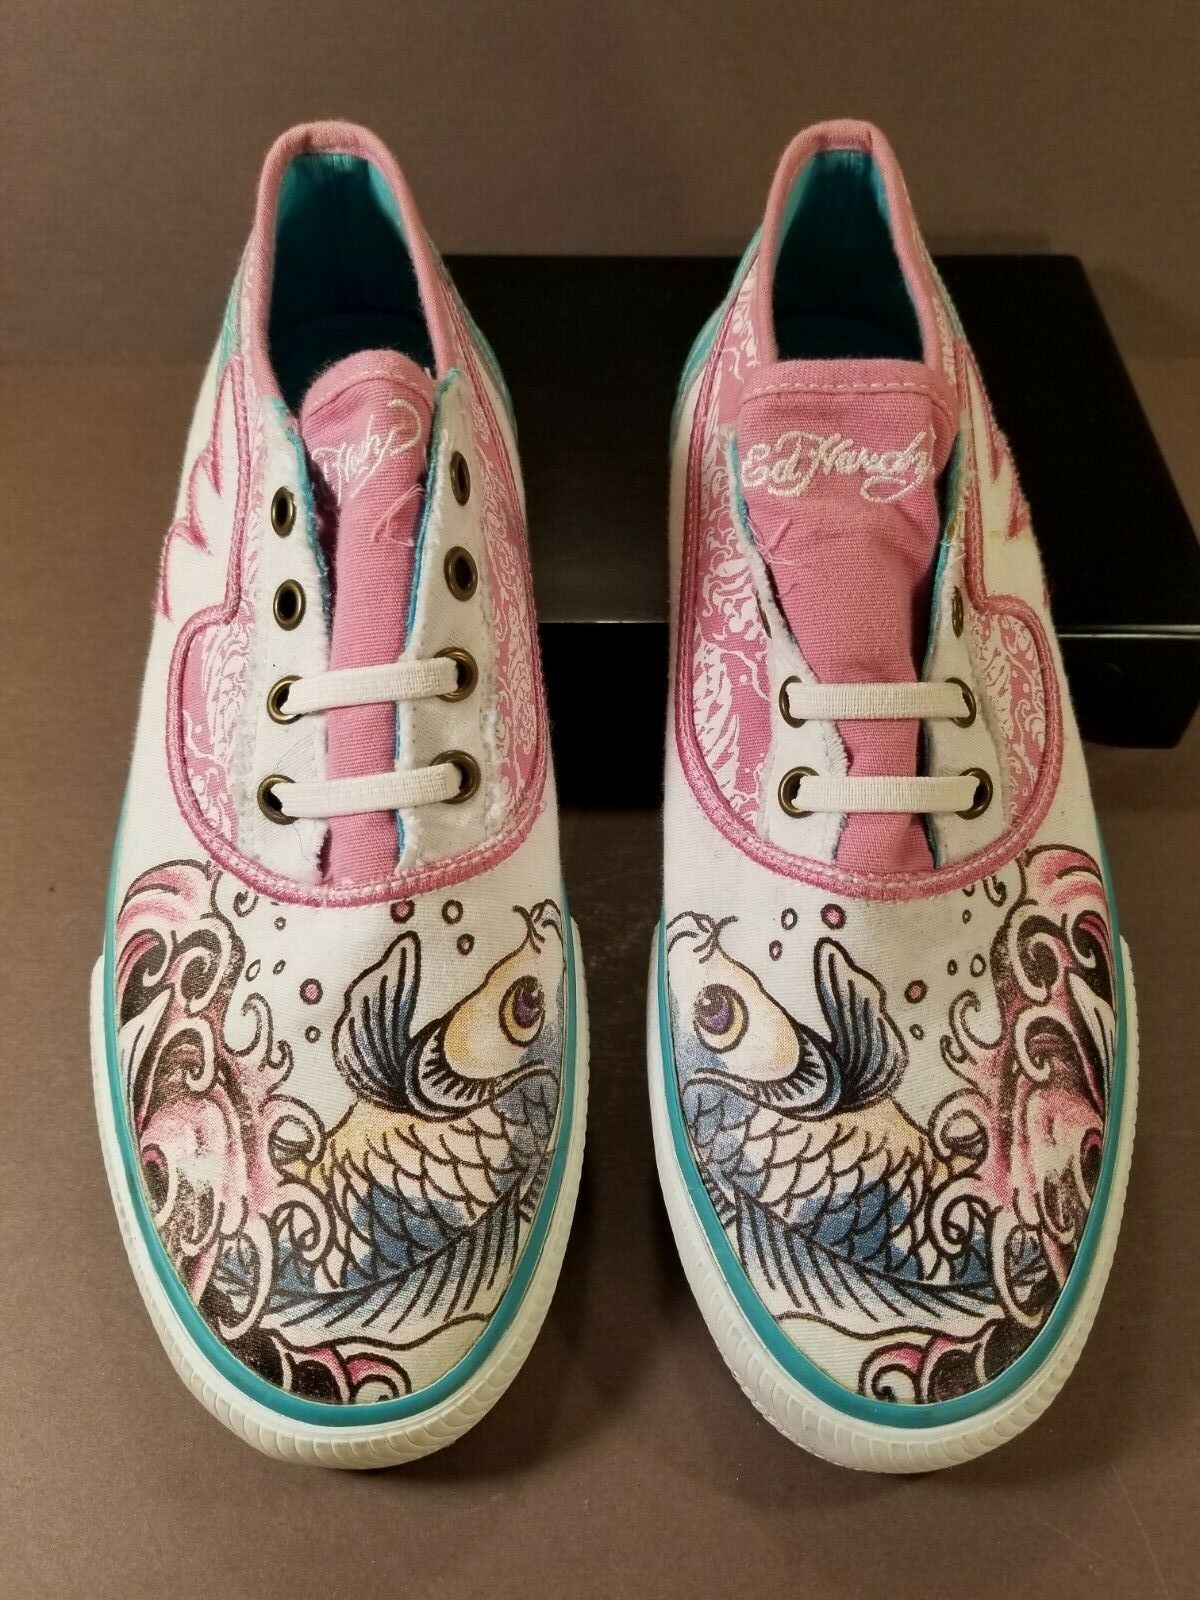 ed hardy laceless sneakers